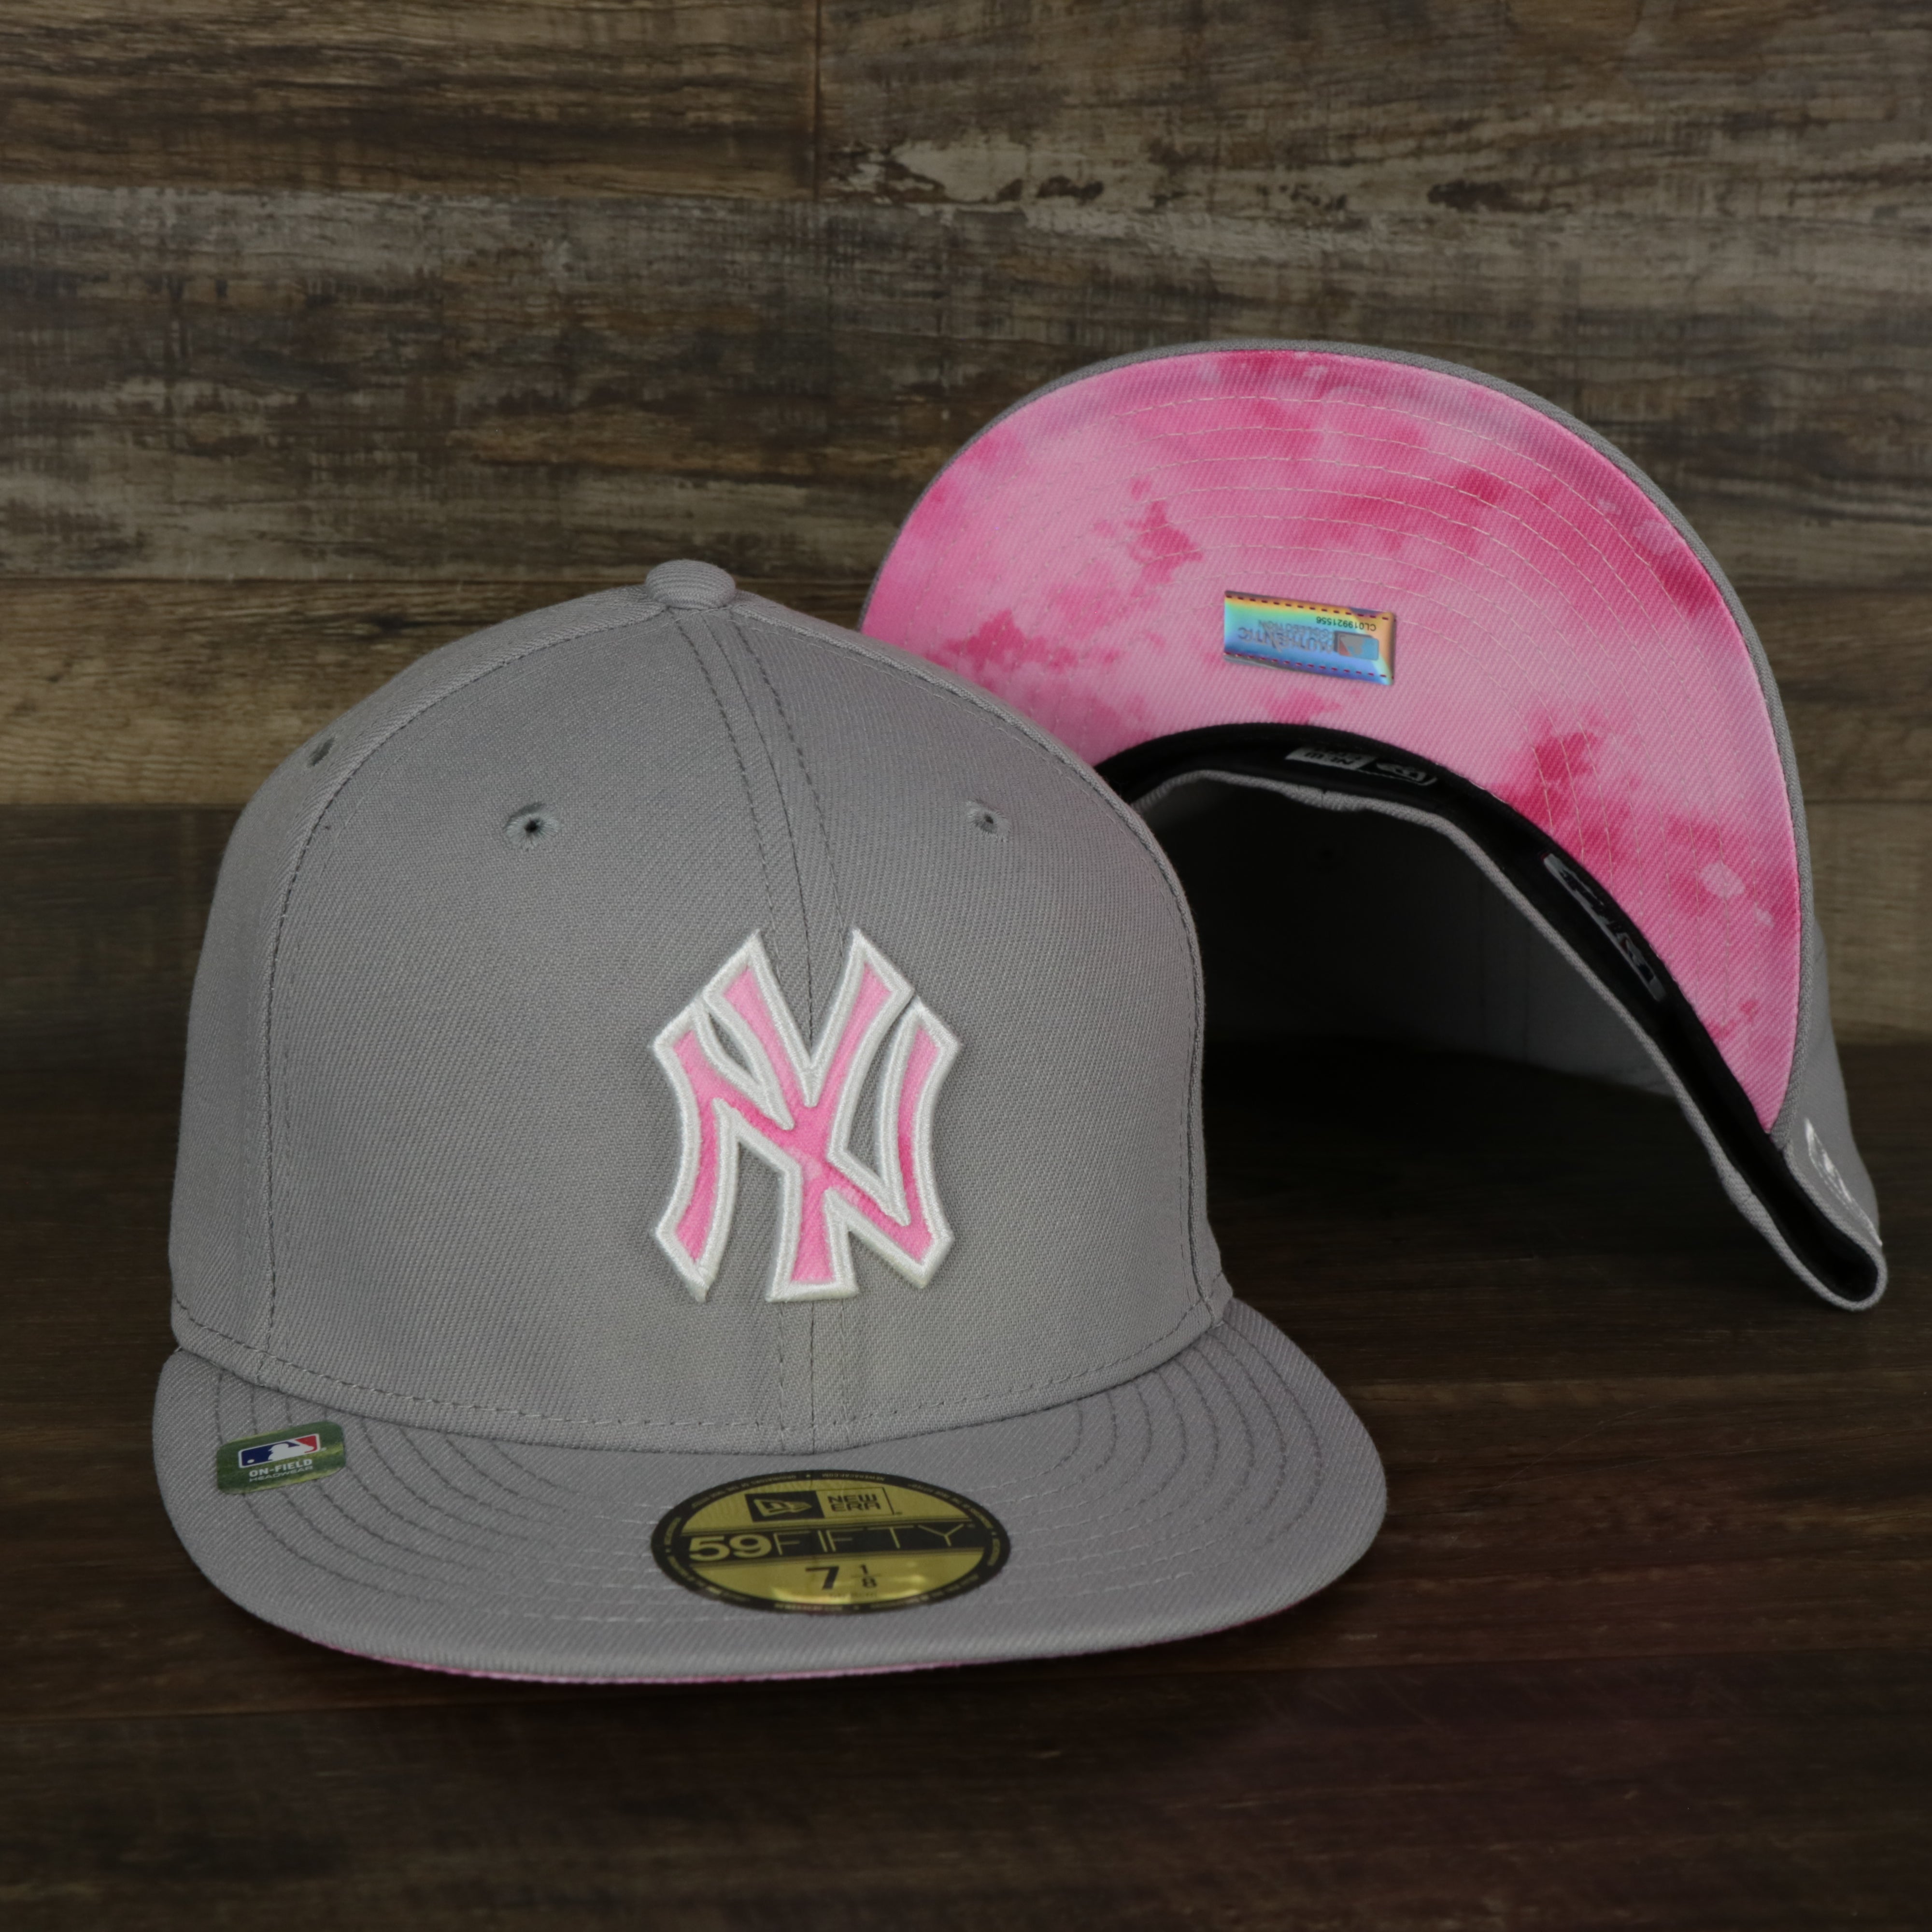 Custom Fitted Hats Have Become Must-Have Collectors' Items. Here's 